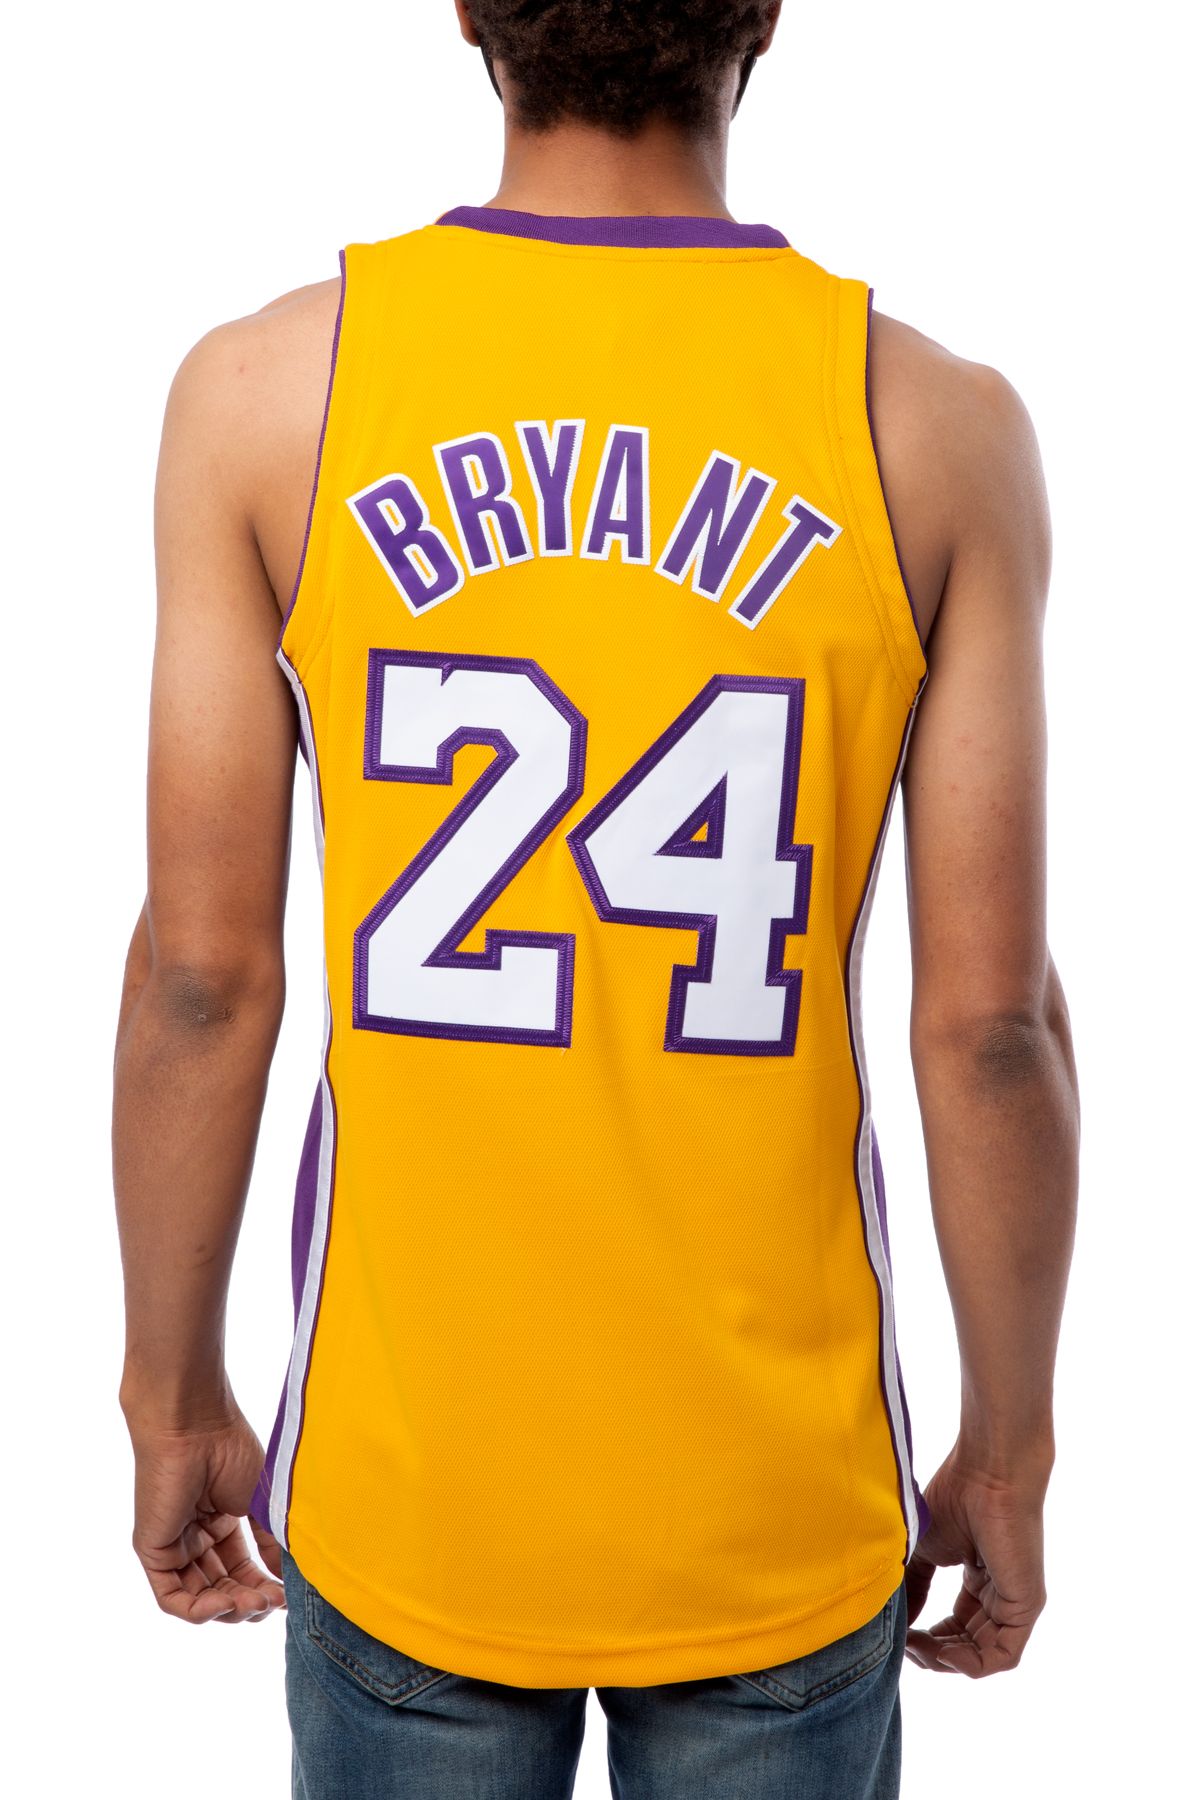 Mitchell & Ness LA Lakers Kobe Bryant #24 2008-2009 Authentic Jersey RSP:  R4,999.99 Exclusively available from Shesha & Hoops Lounge…